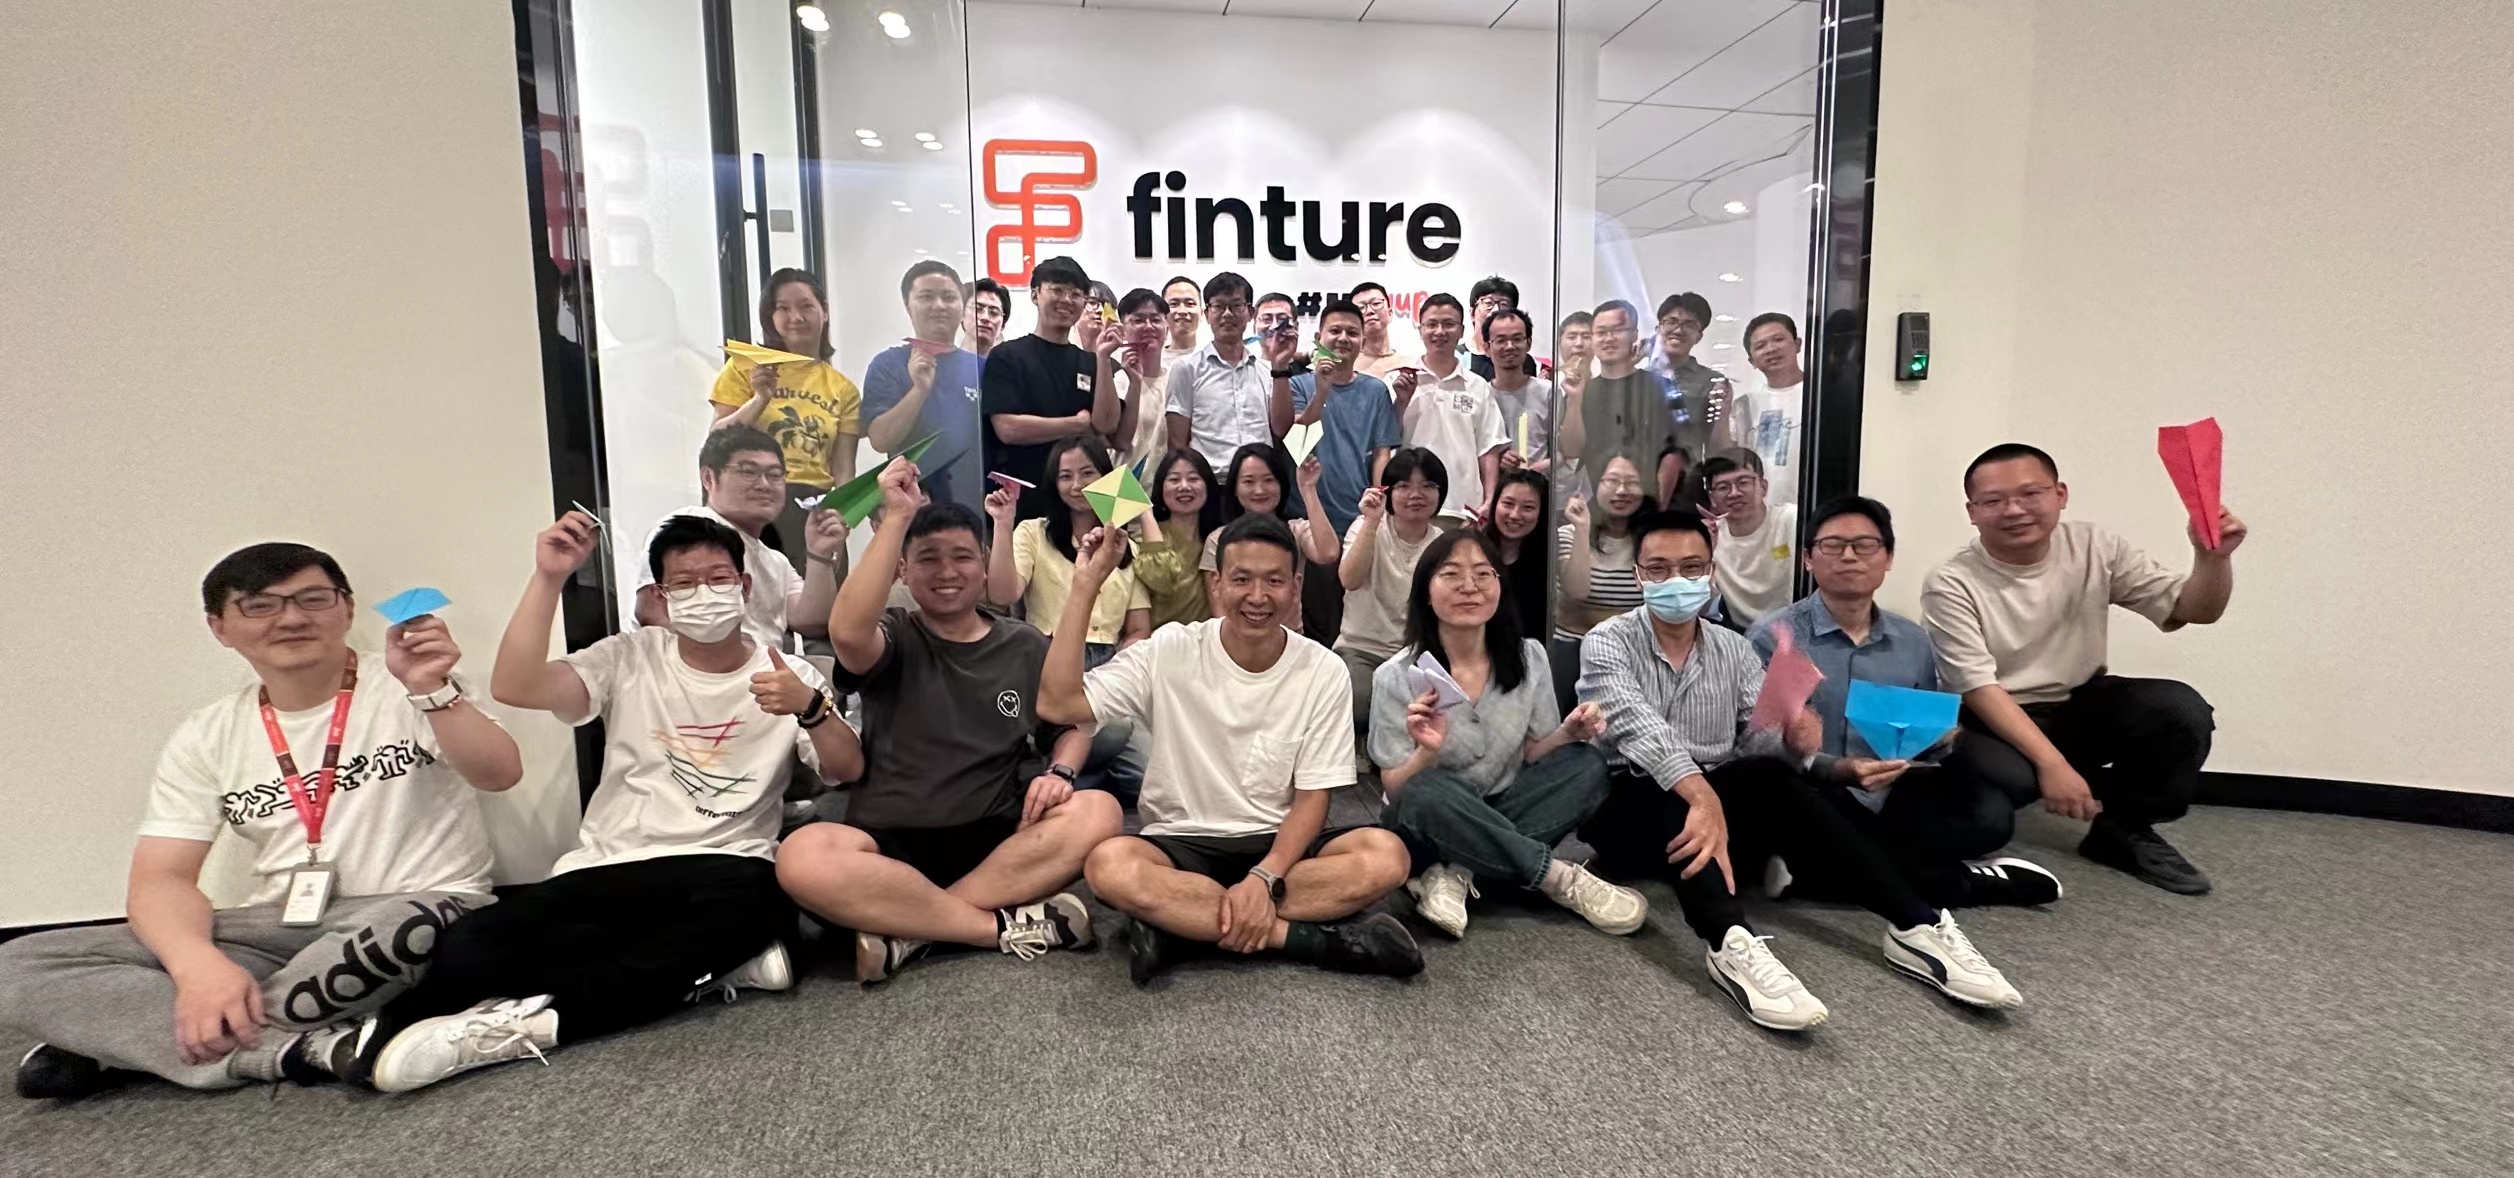 Finture is a Singapore-based fintech company that has offices in Shanghai, Singapore, and Jakarta.